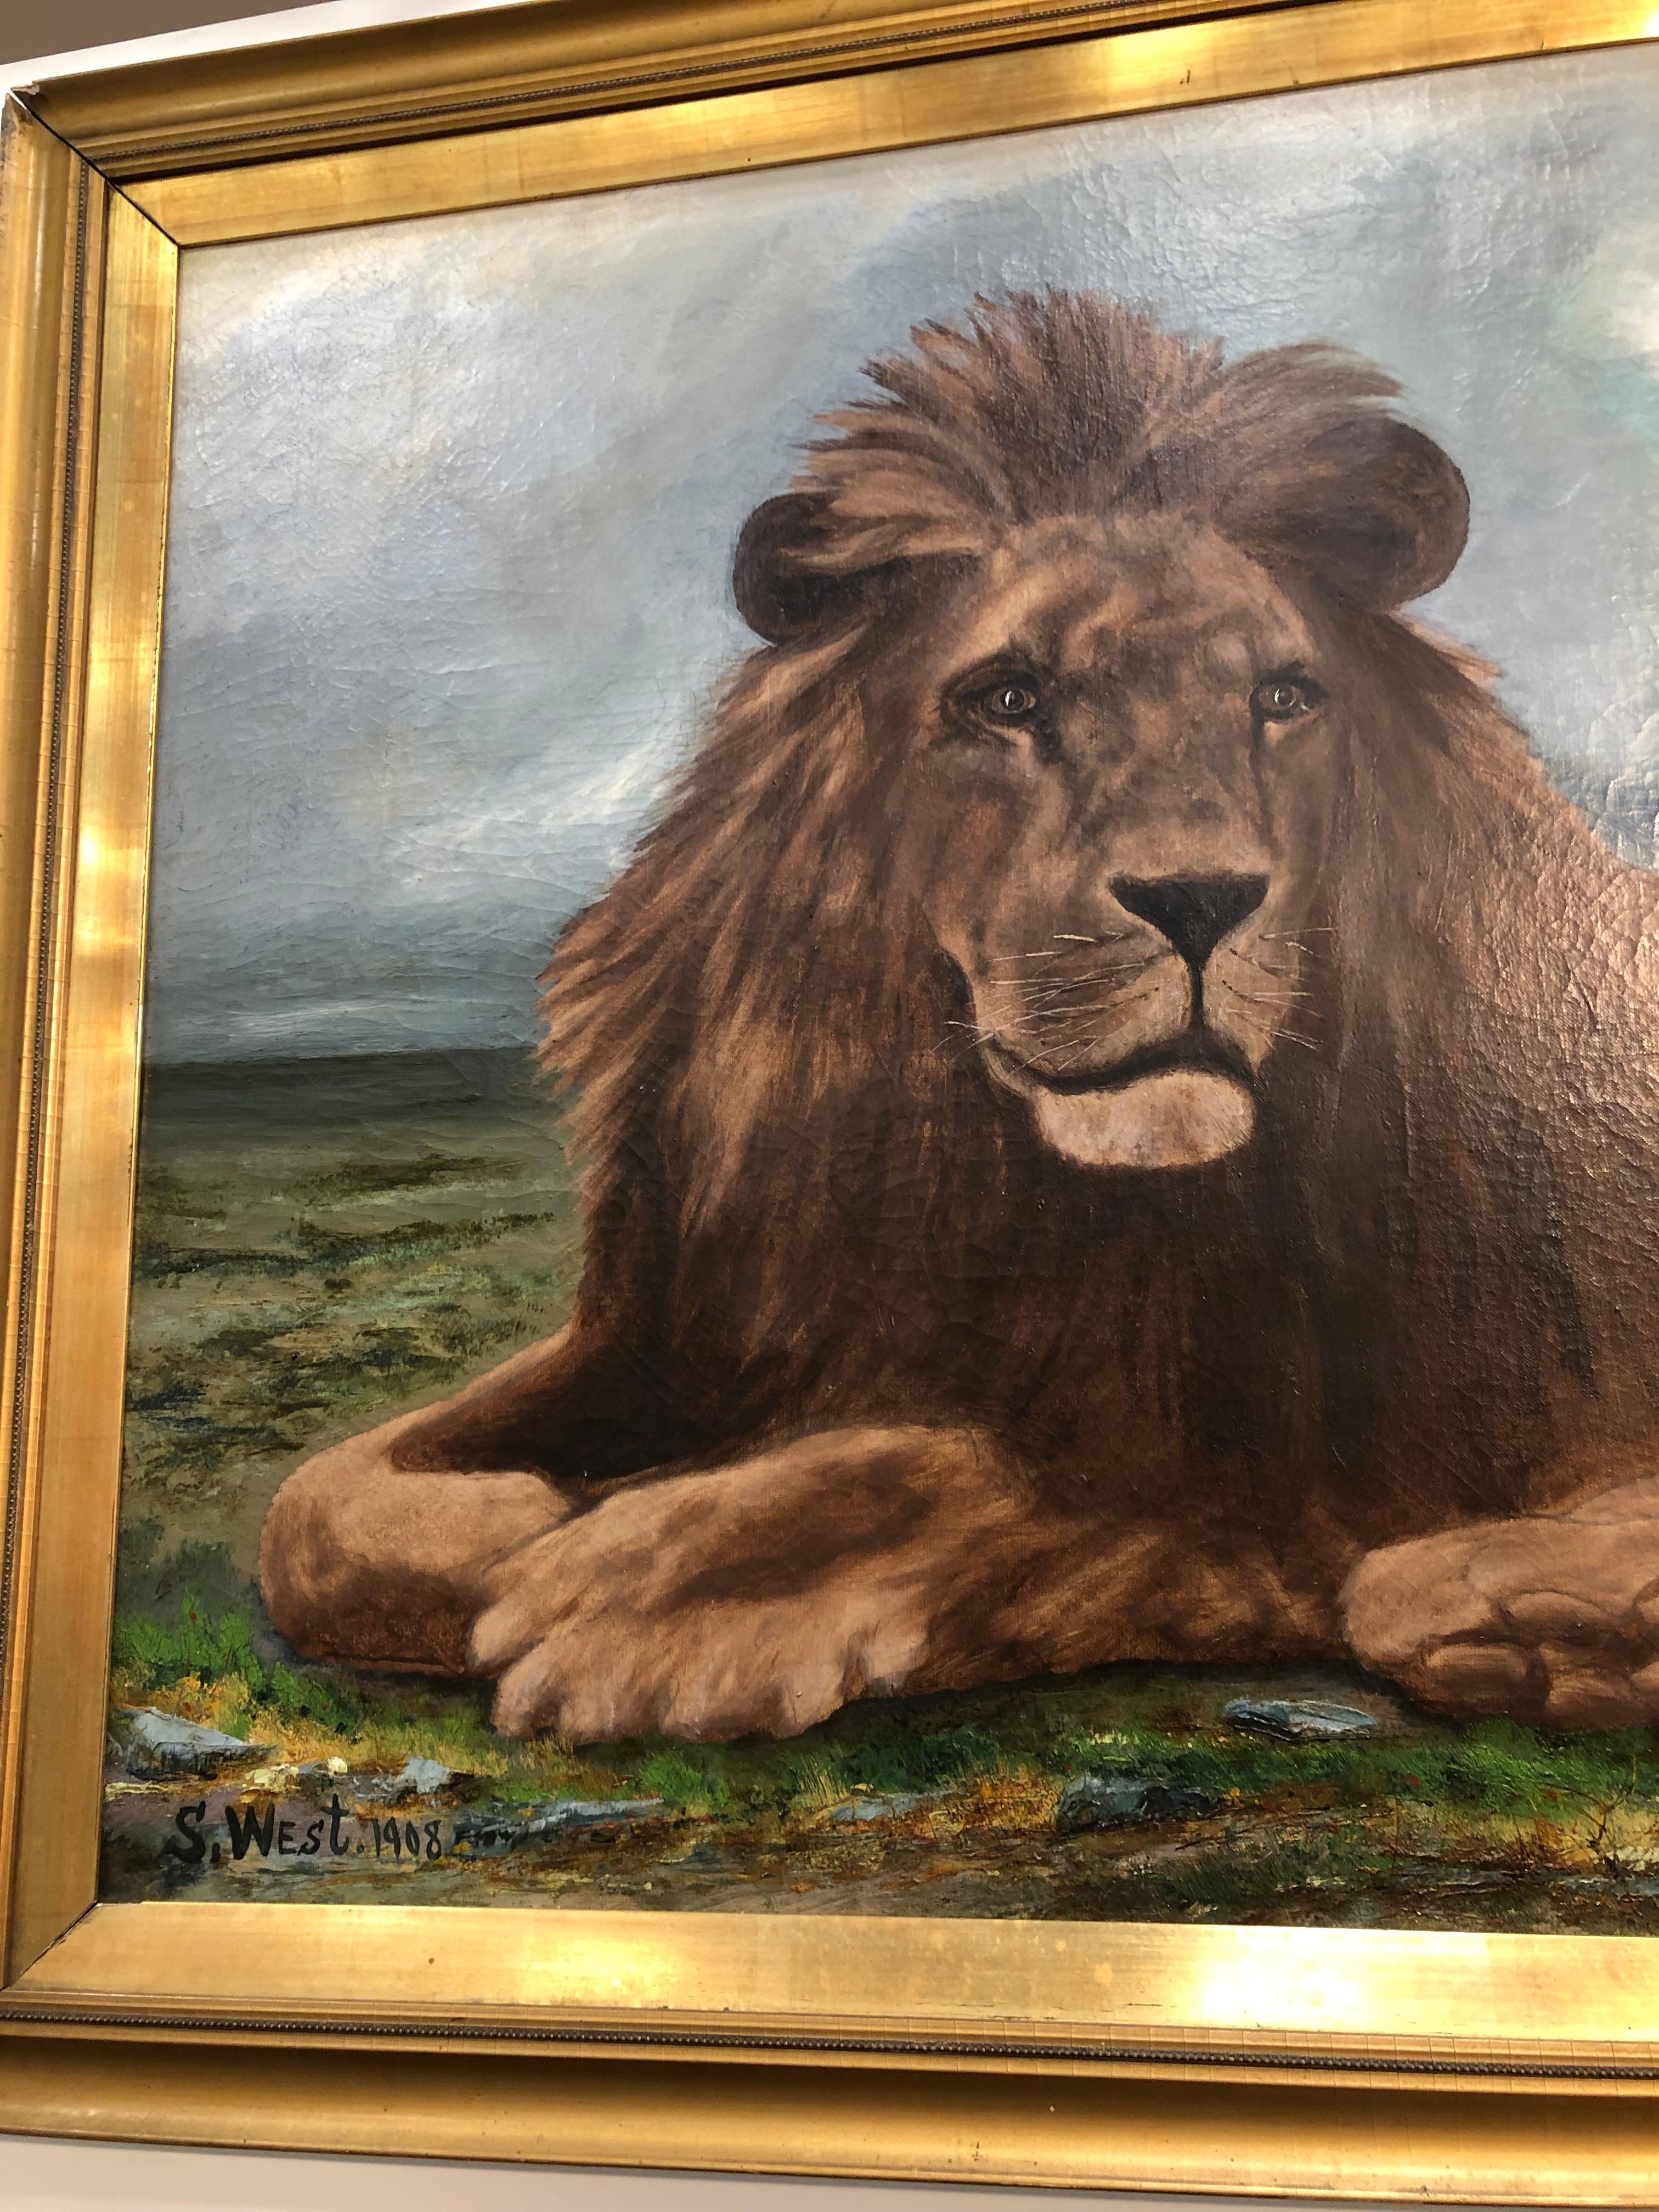 Folk Art Lion Portrait Painting Majestic Beast Oil on Canvas Signed and Dated S. West For Sale